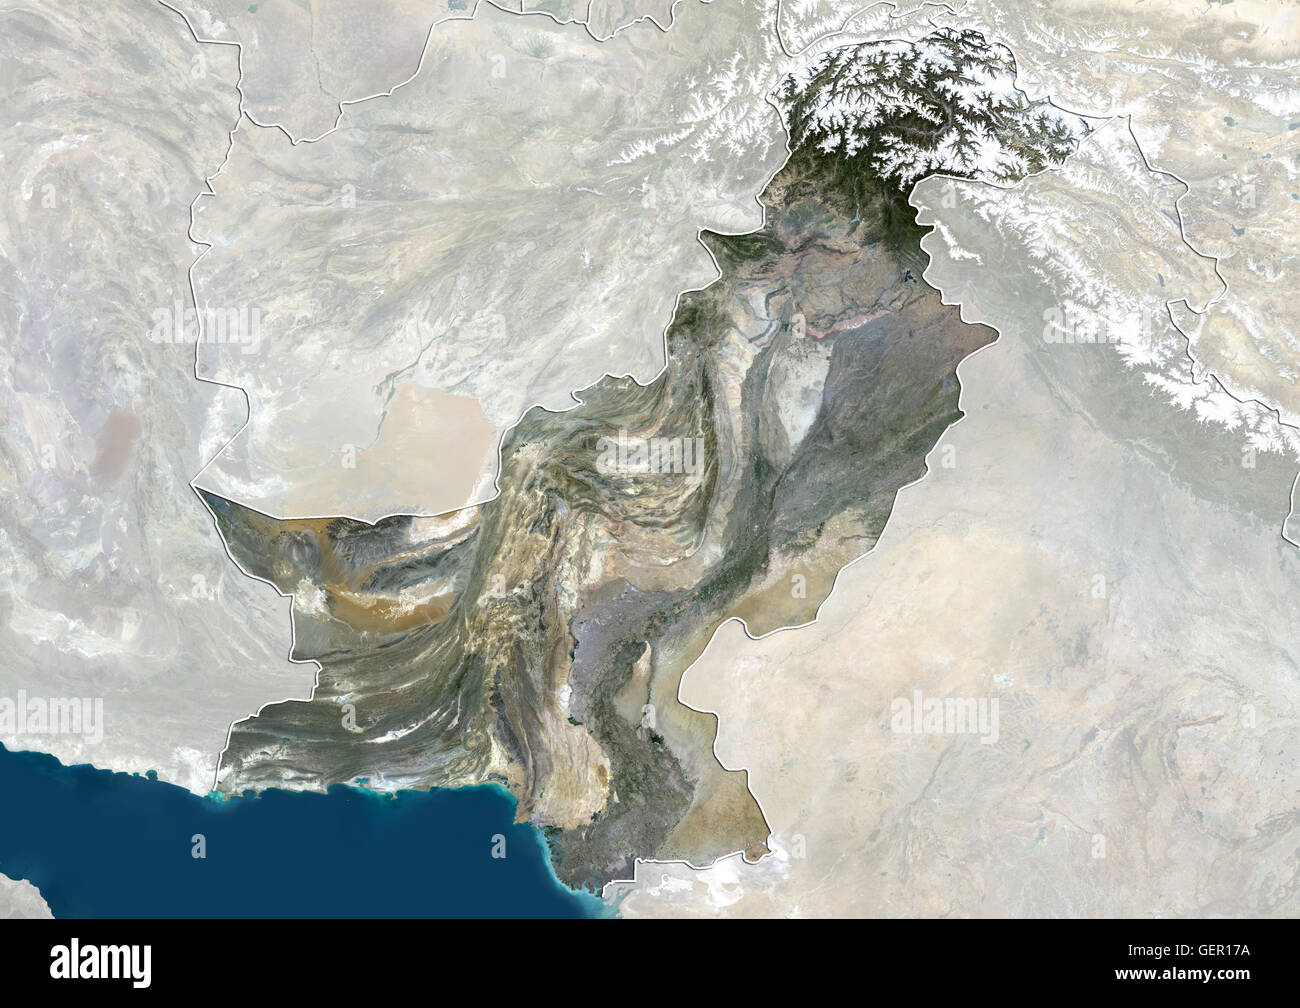 Satellite view of Pakistan (with country boundaries and mask). This image was compiled from data acquired by Landsat 8 satellite in 2014. Stock Photo